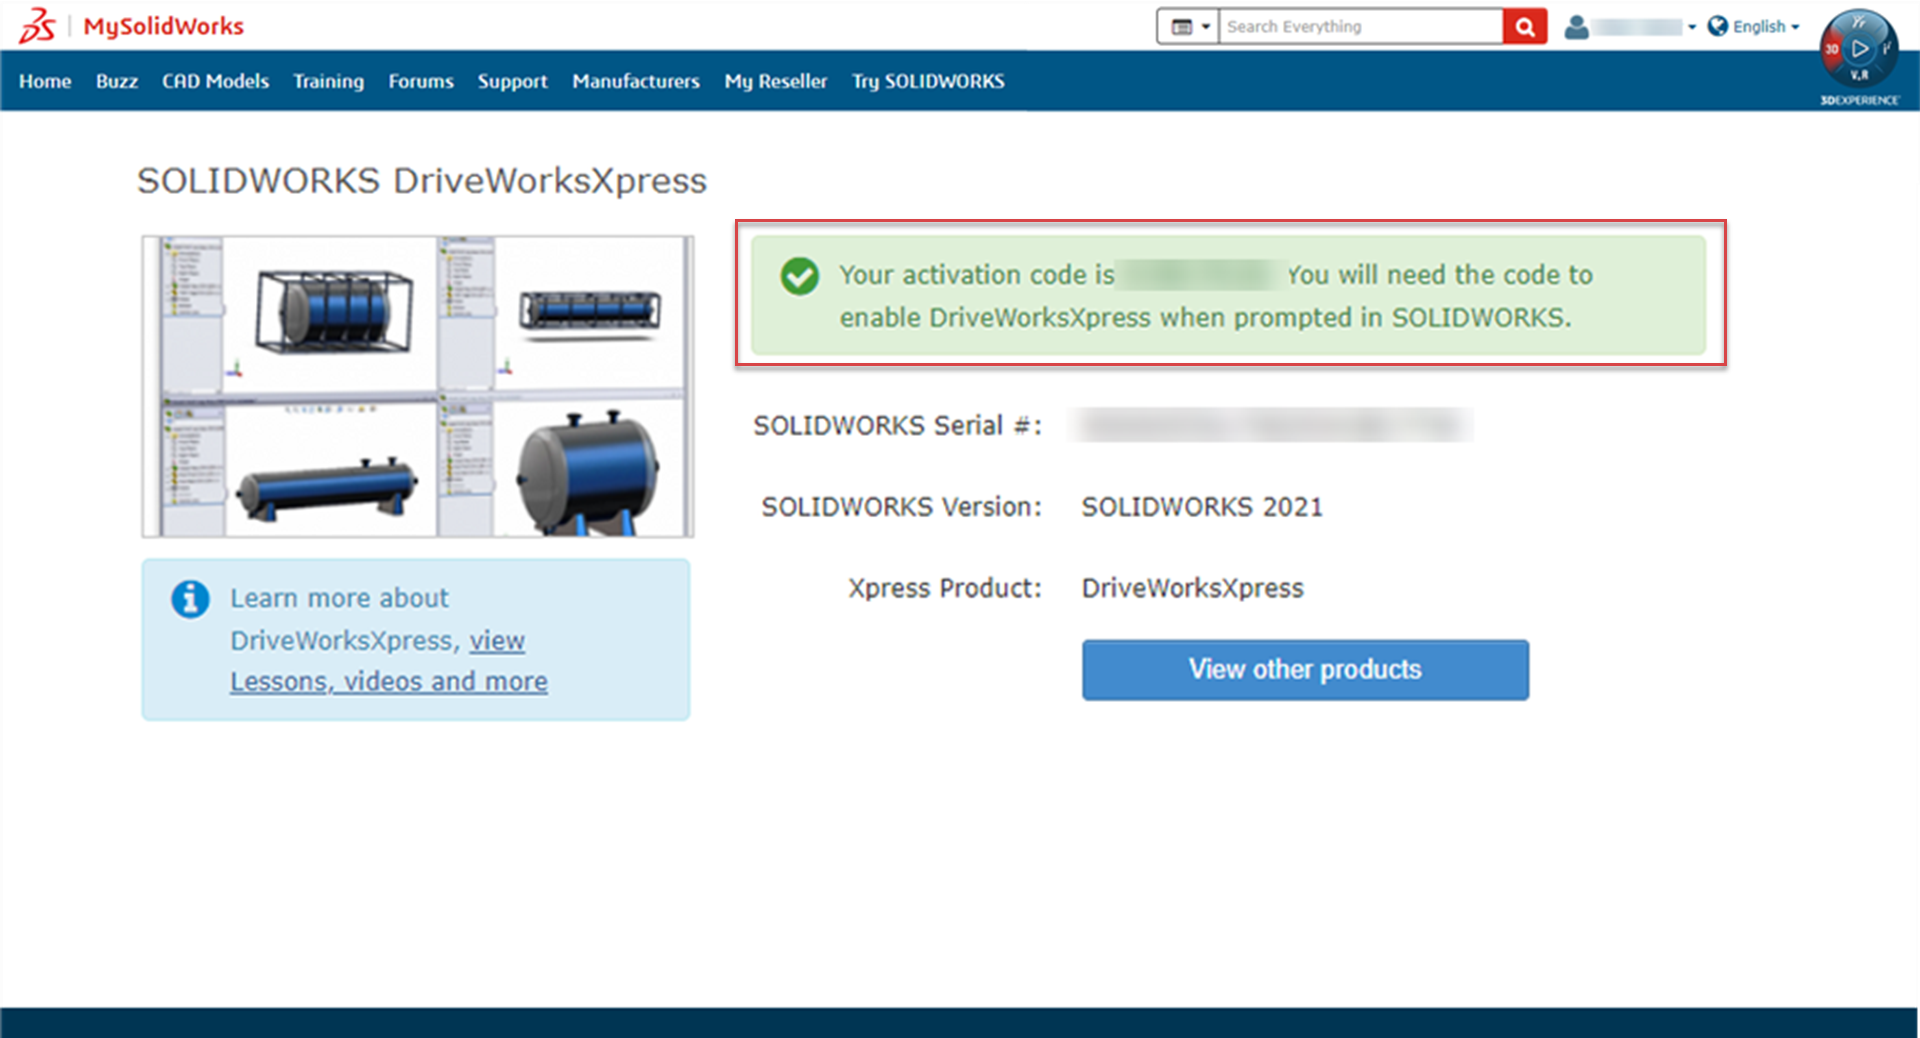 A screenshot of the DriveWorksXpress activation code page.